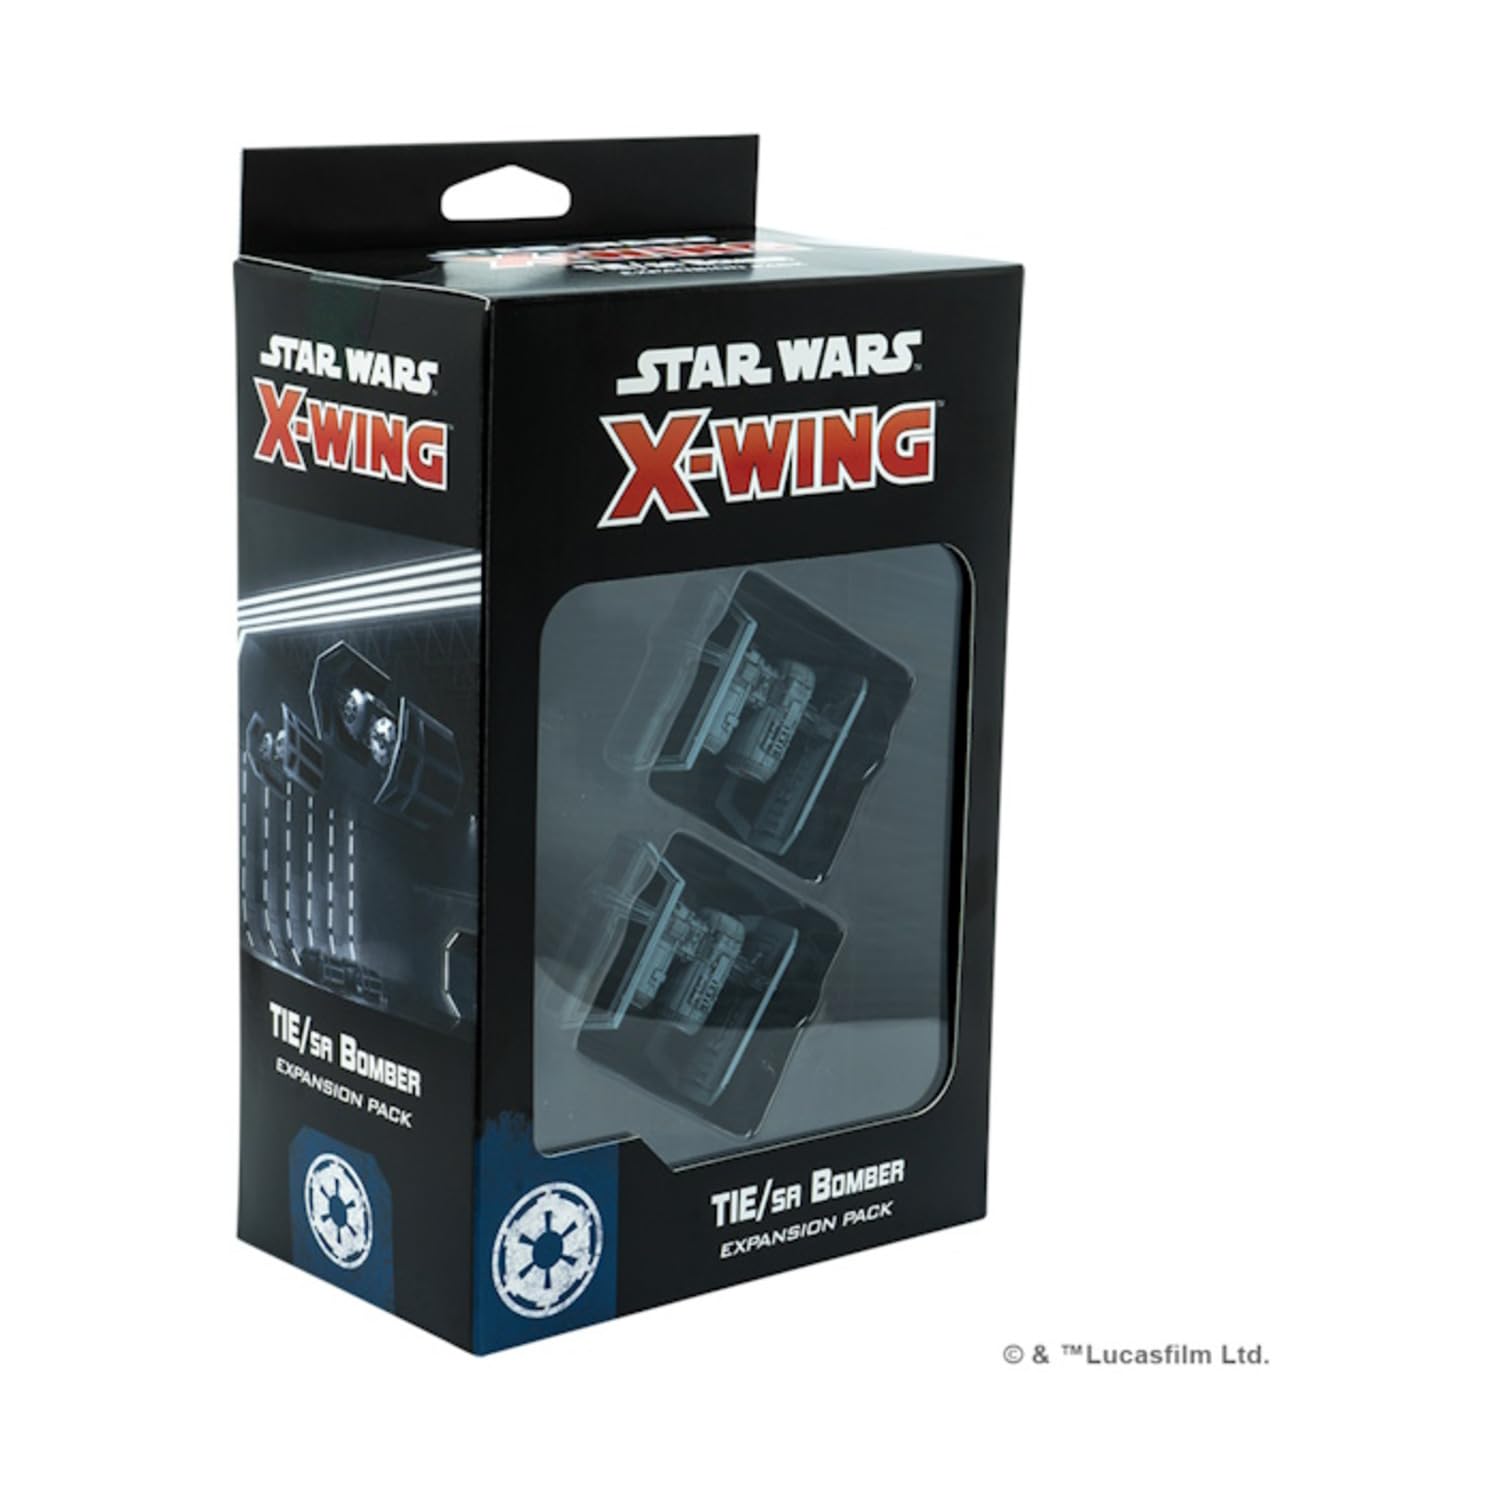 Atomic Mass Games Star Wars X-Wing 2nd Edition Miniatures Game TIE/sa Bomber Expansion Pack - Unleash Imperial Fury! Strategy Game for Kids & Adults, Ages 14+, 2 Players, 30-45 Min Playtime, Made